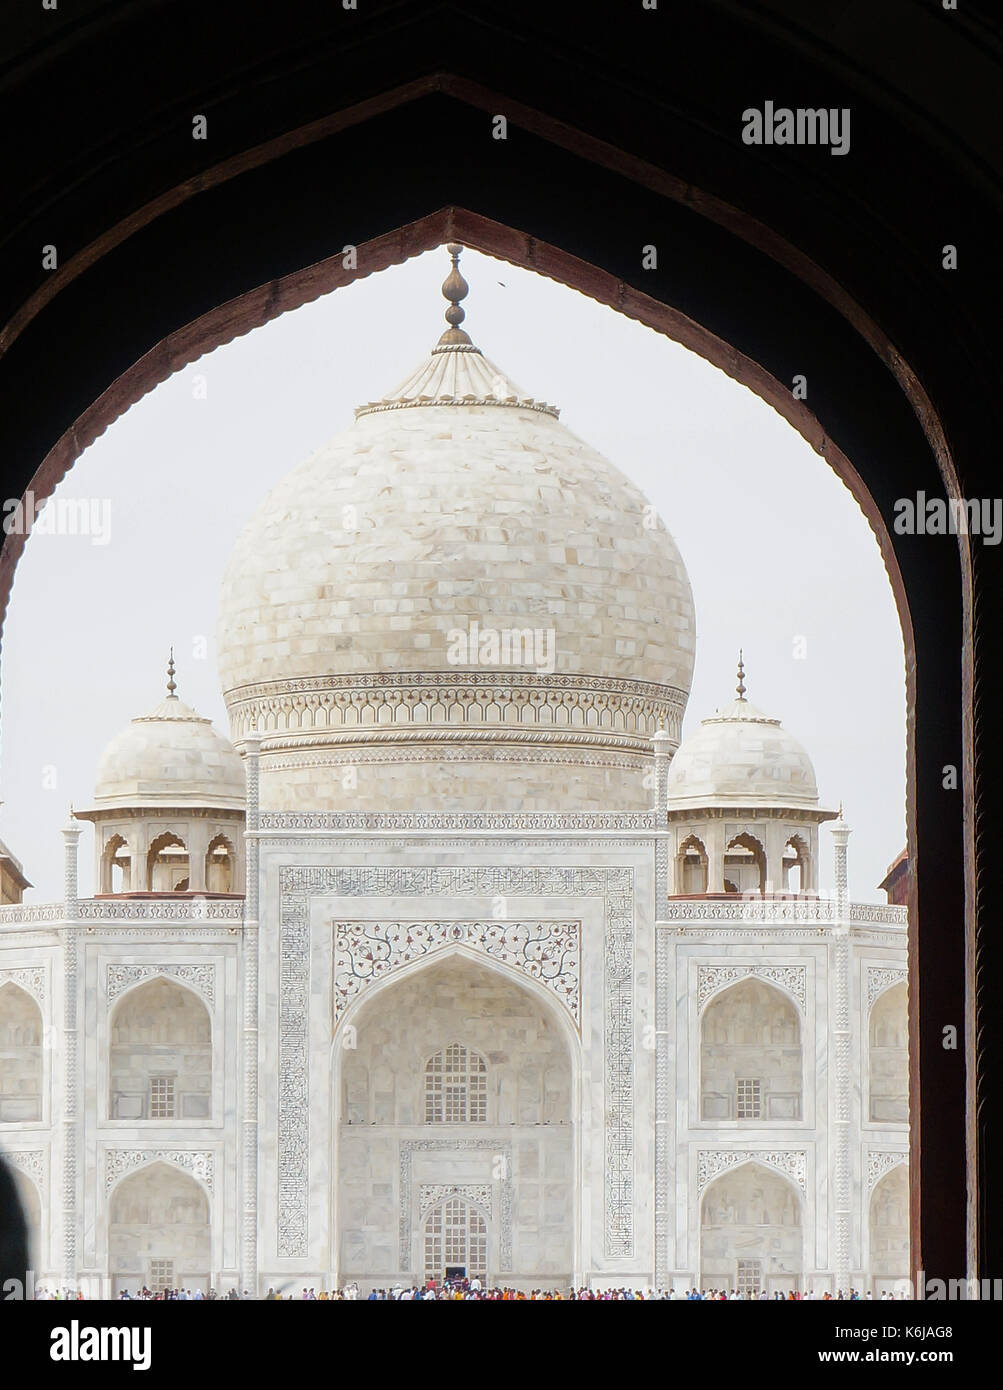 Taj Mahal as seen through the arch of the entry gate Stock Photo